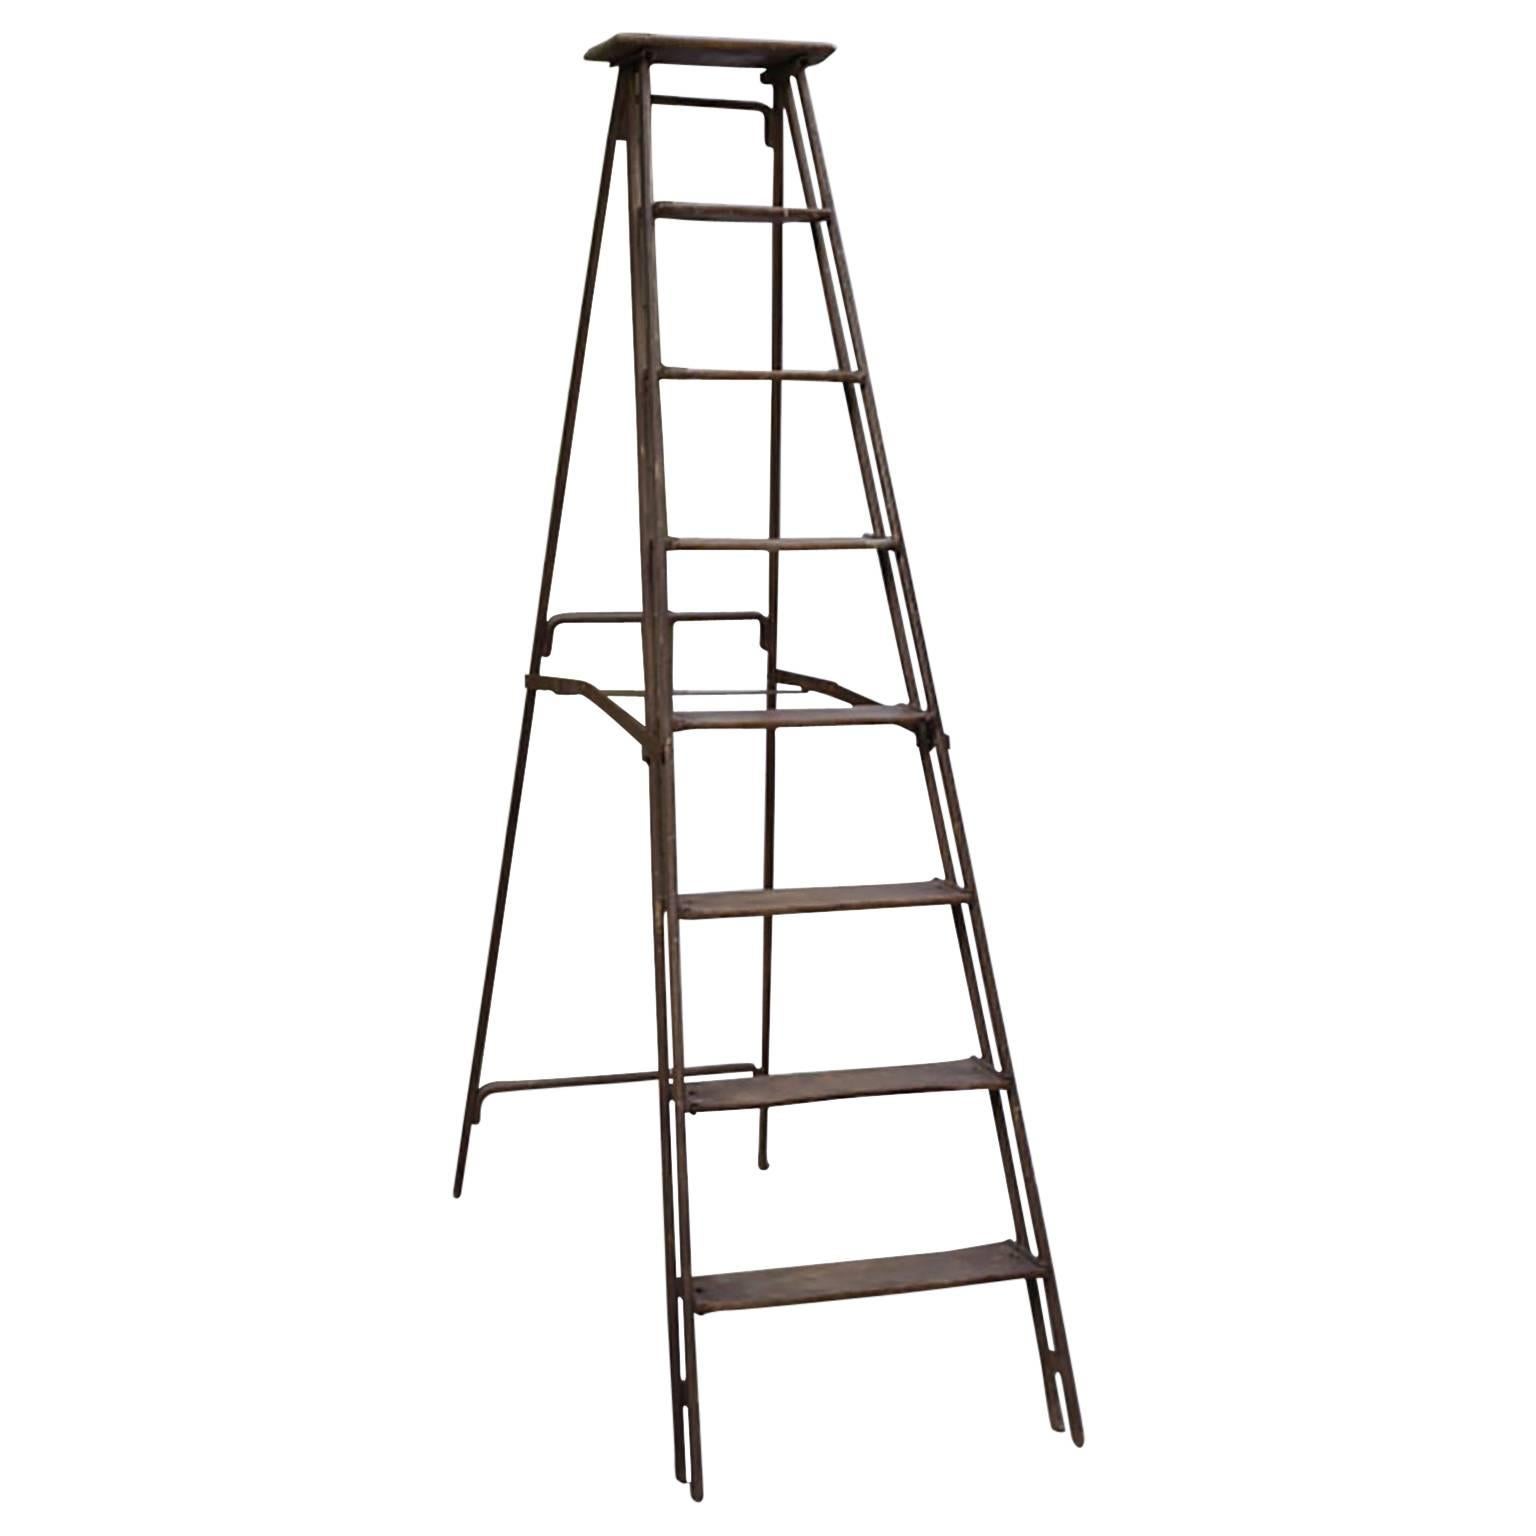 1930s Steel and Wood Ladder